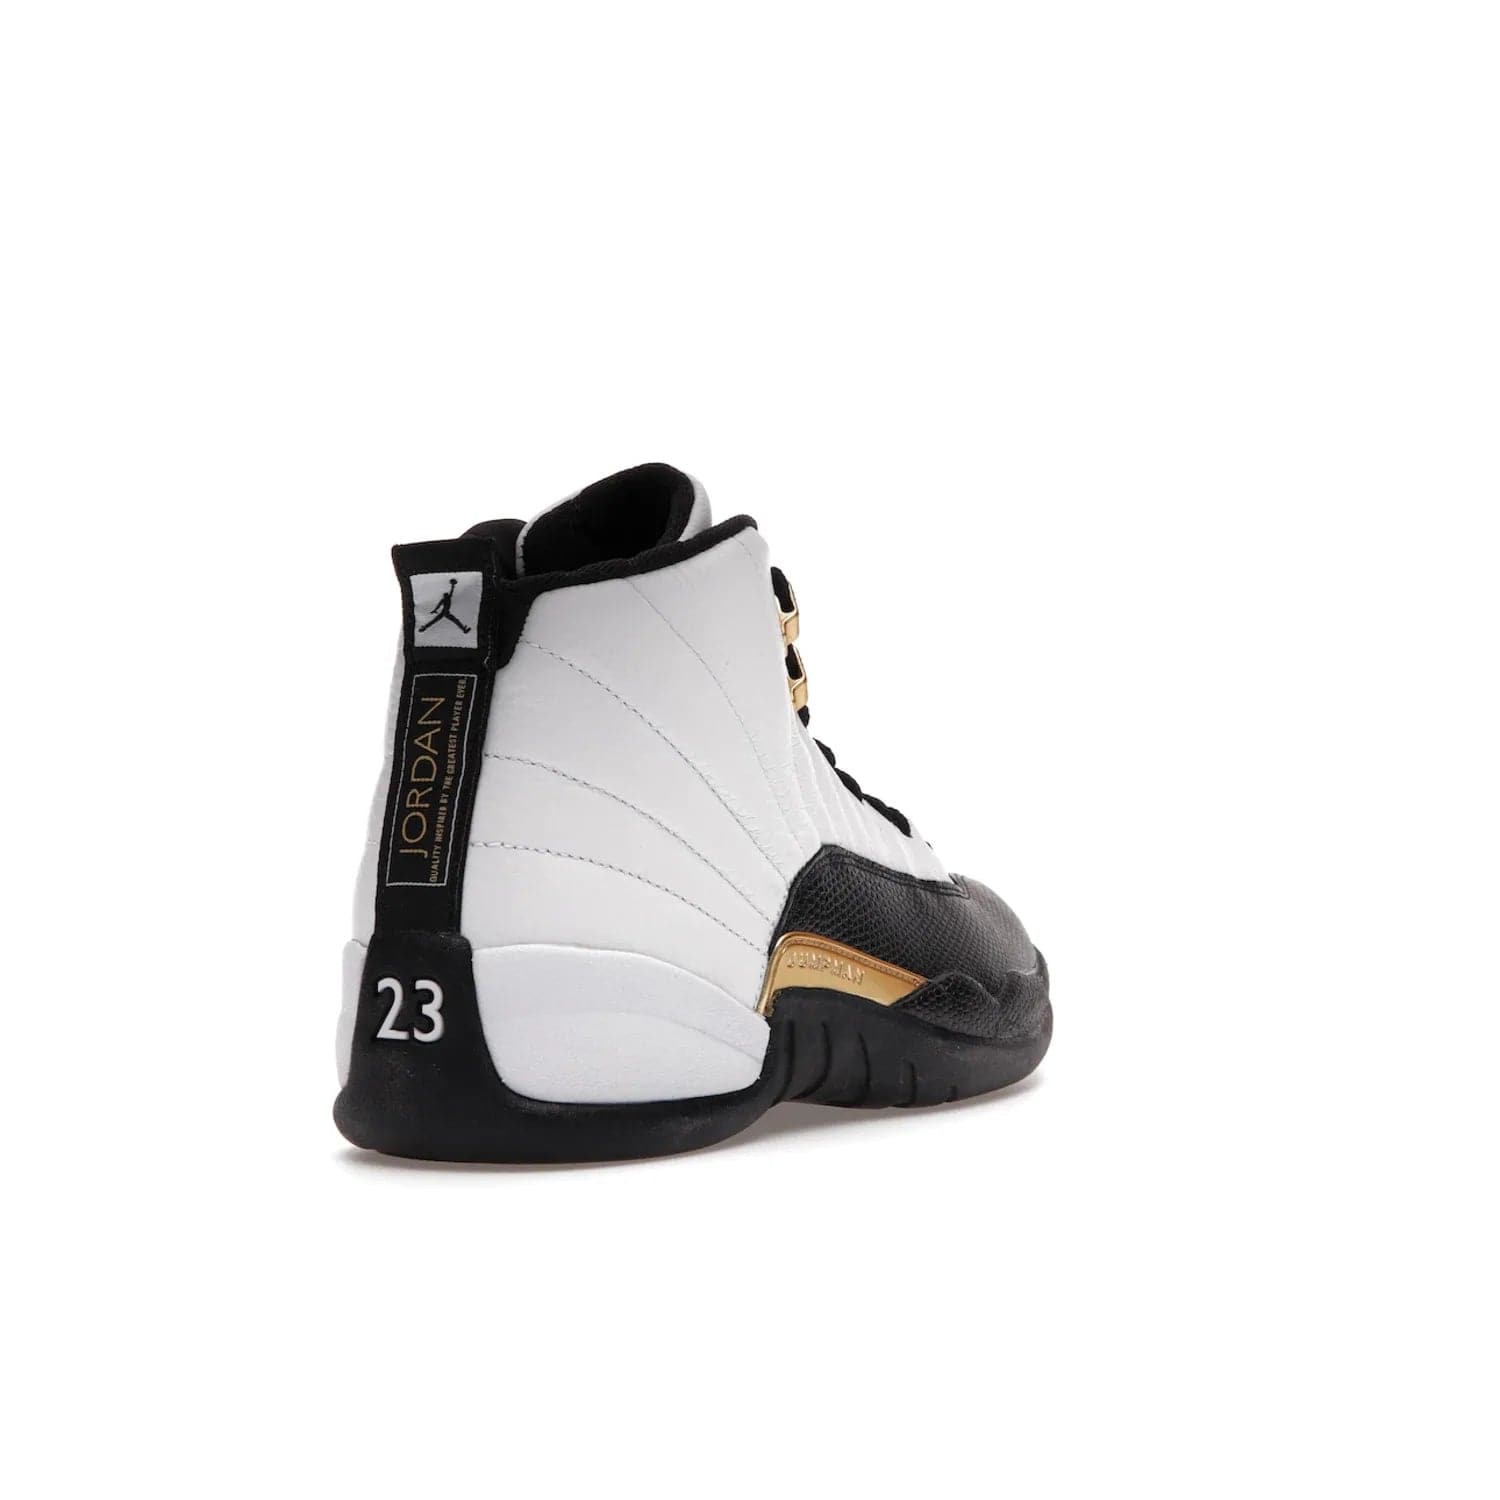 Jordan 12 Retro Royalty Taxi - Image 31 - Only at www.BallersClubKickz.com - Make a statement with the Air Jordan 12 Retro Royalty Taxi. Woven heel tag, gold plaquet, white tumbled leather upper plus a black toe wrap, make this modern take on the classic a must-have. Available in November 2021.